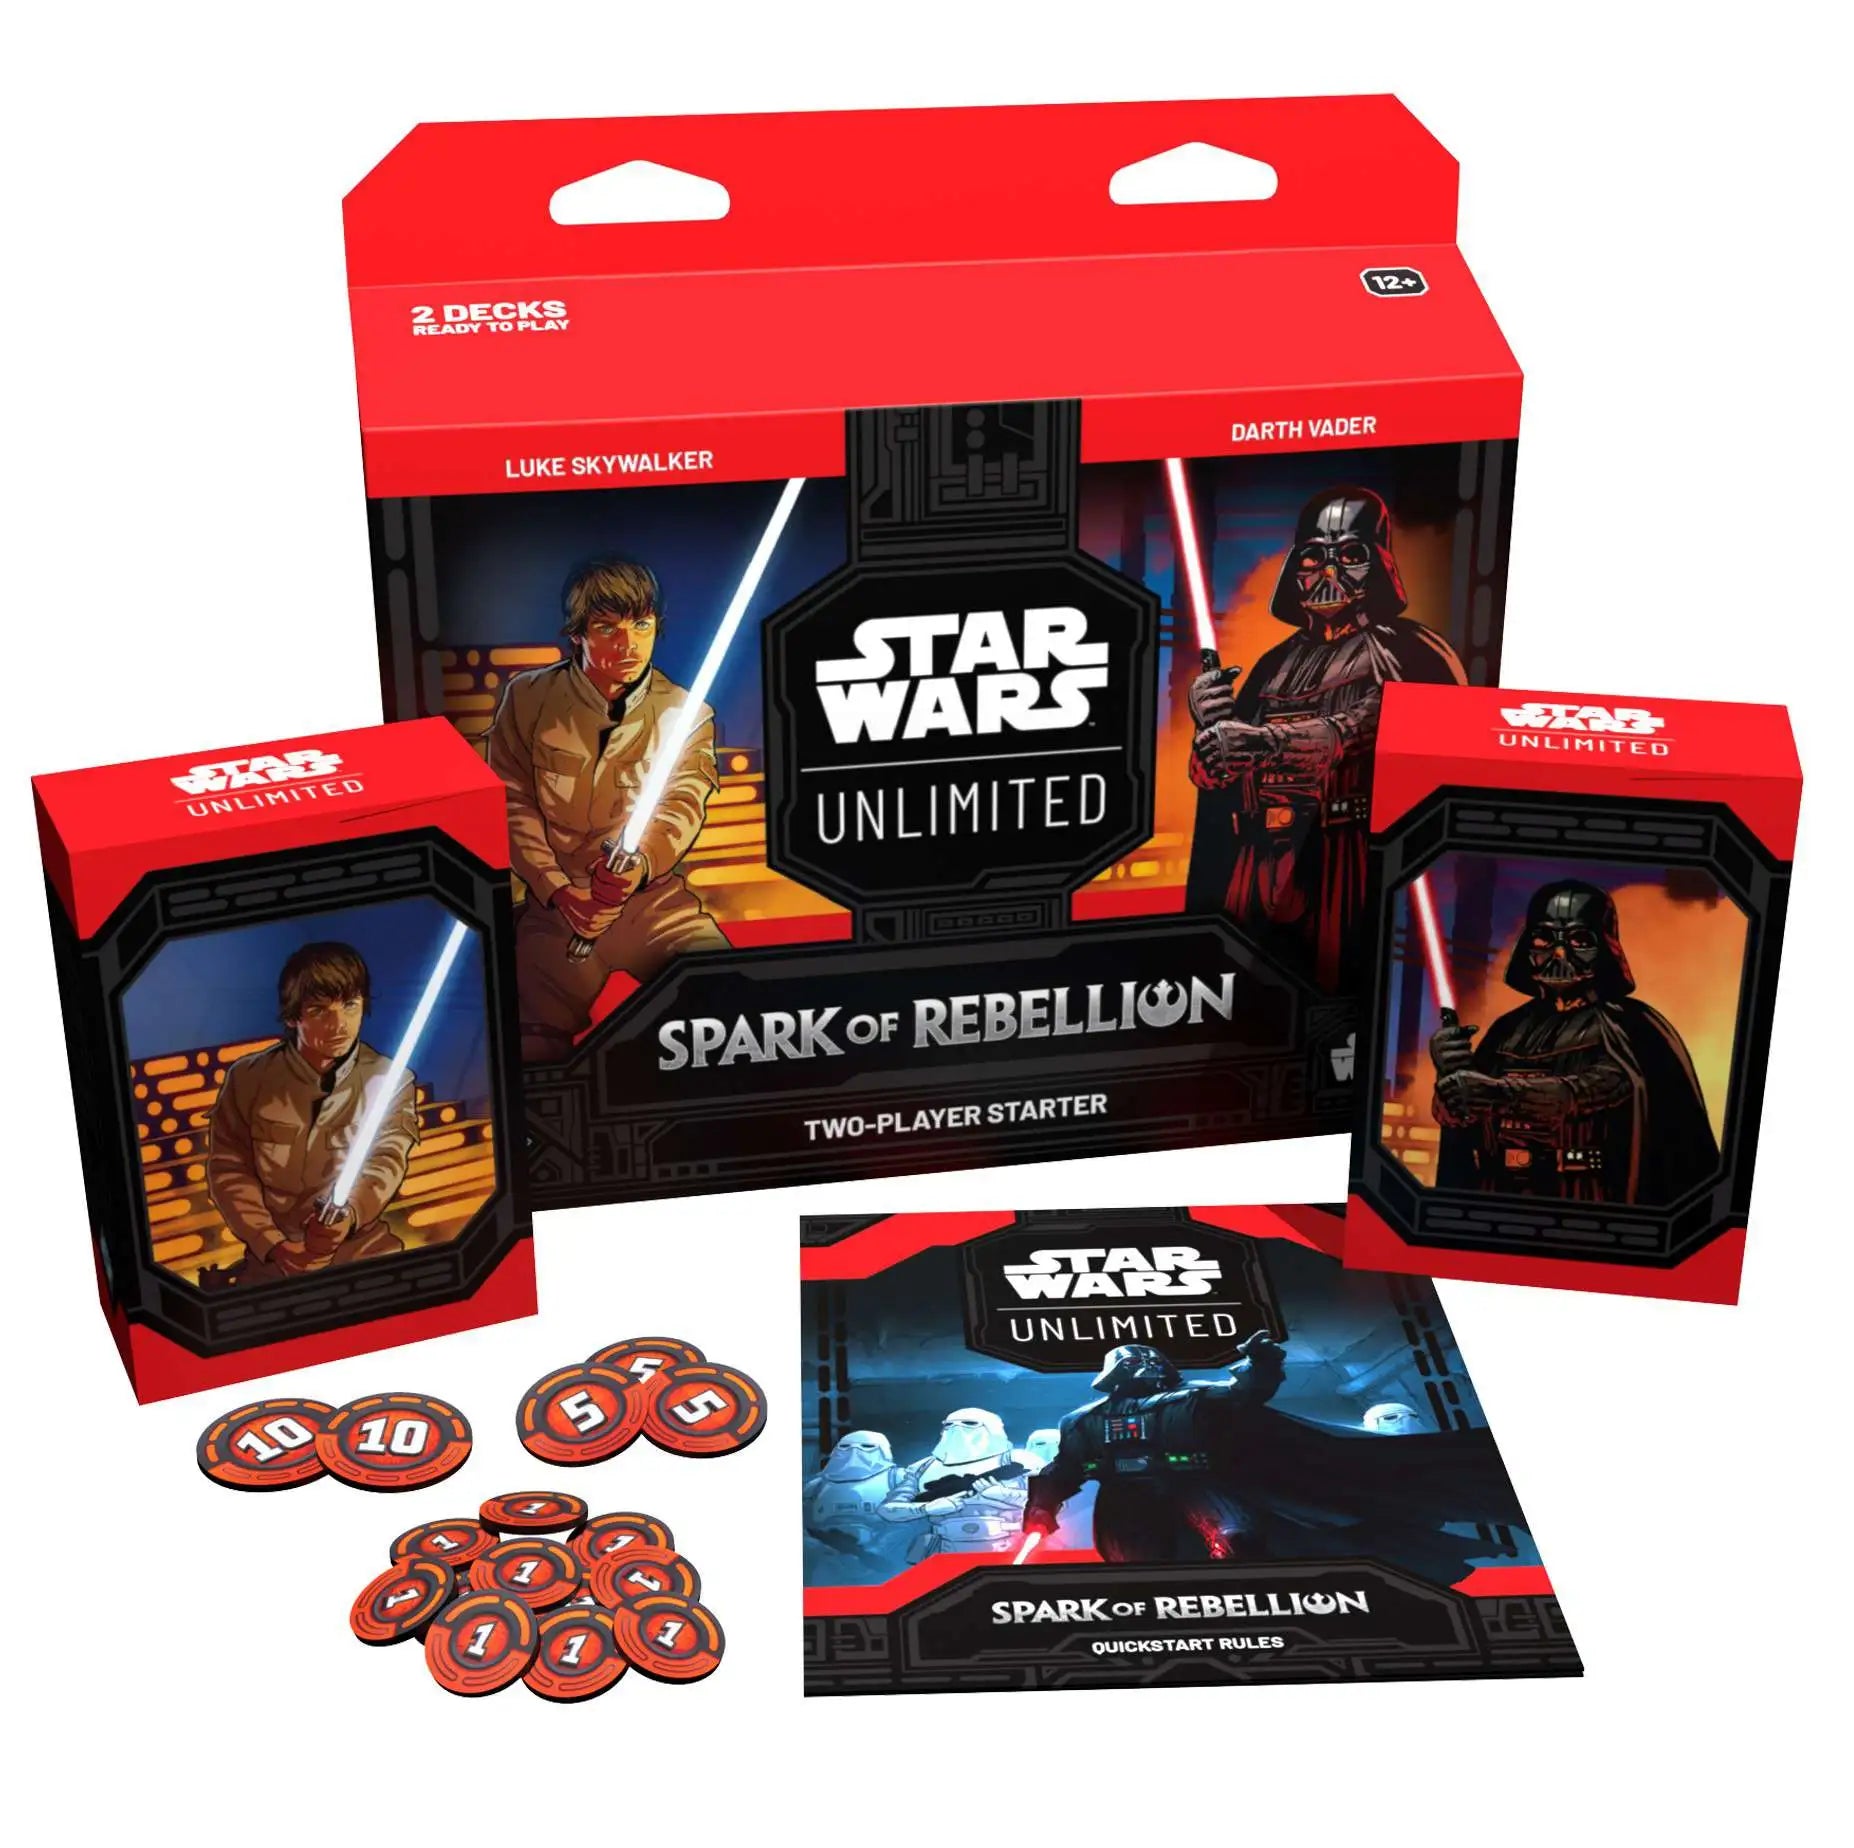 Star Wars Unlimited Spark of Rebellion (SoR) Two-Player Starter Kit Star Wars Unlimited Fantasy Flight Games   